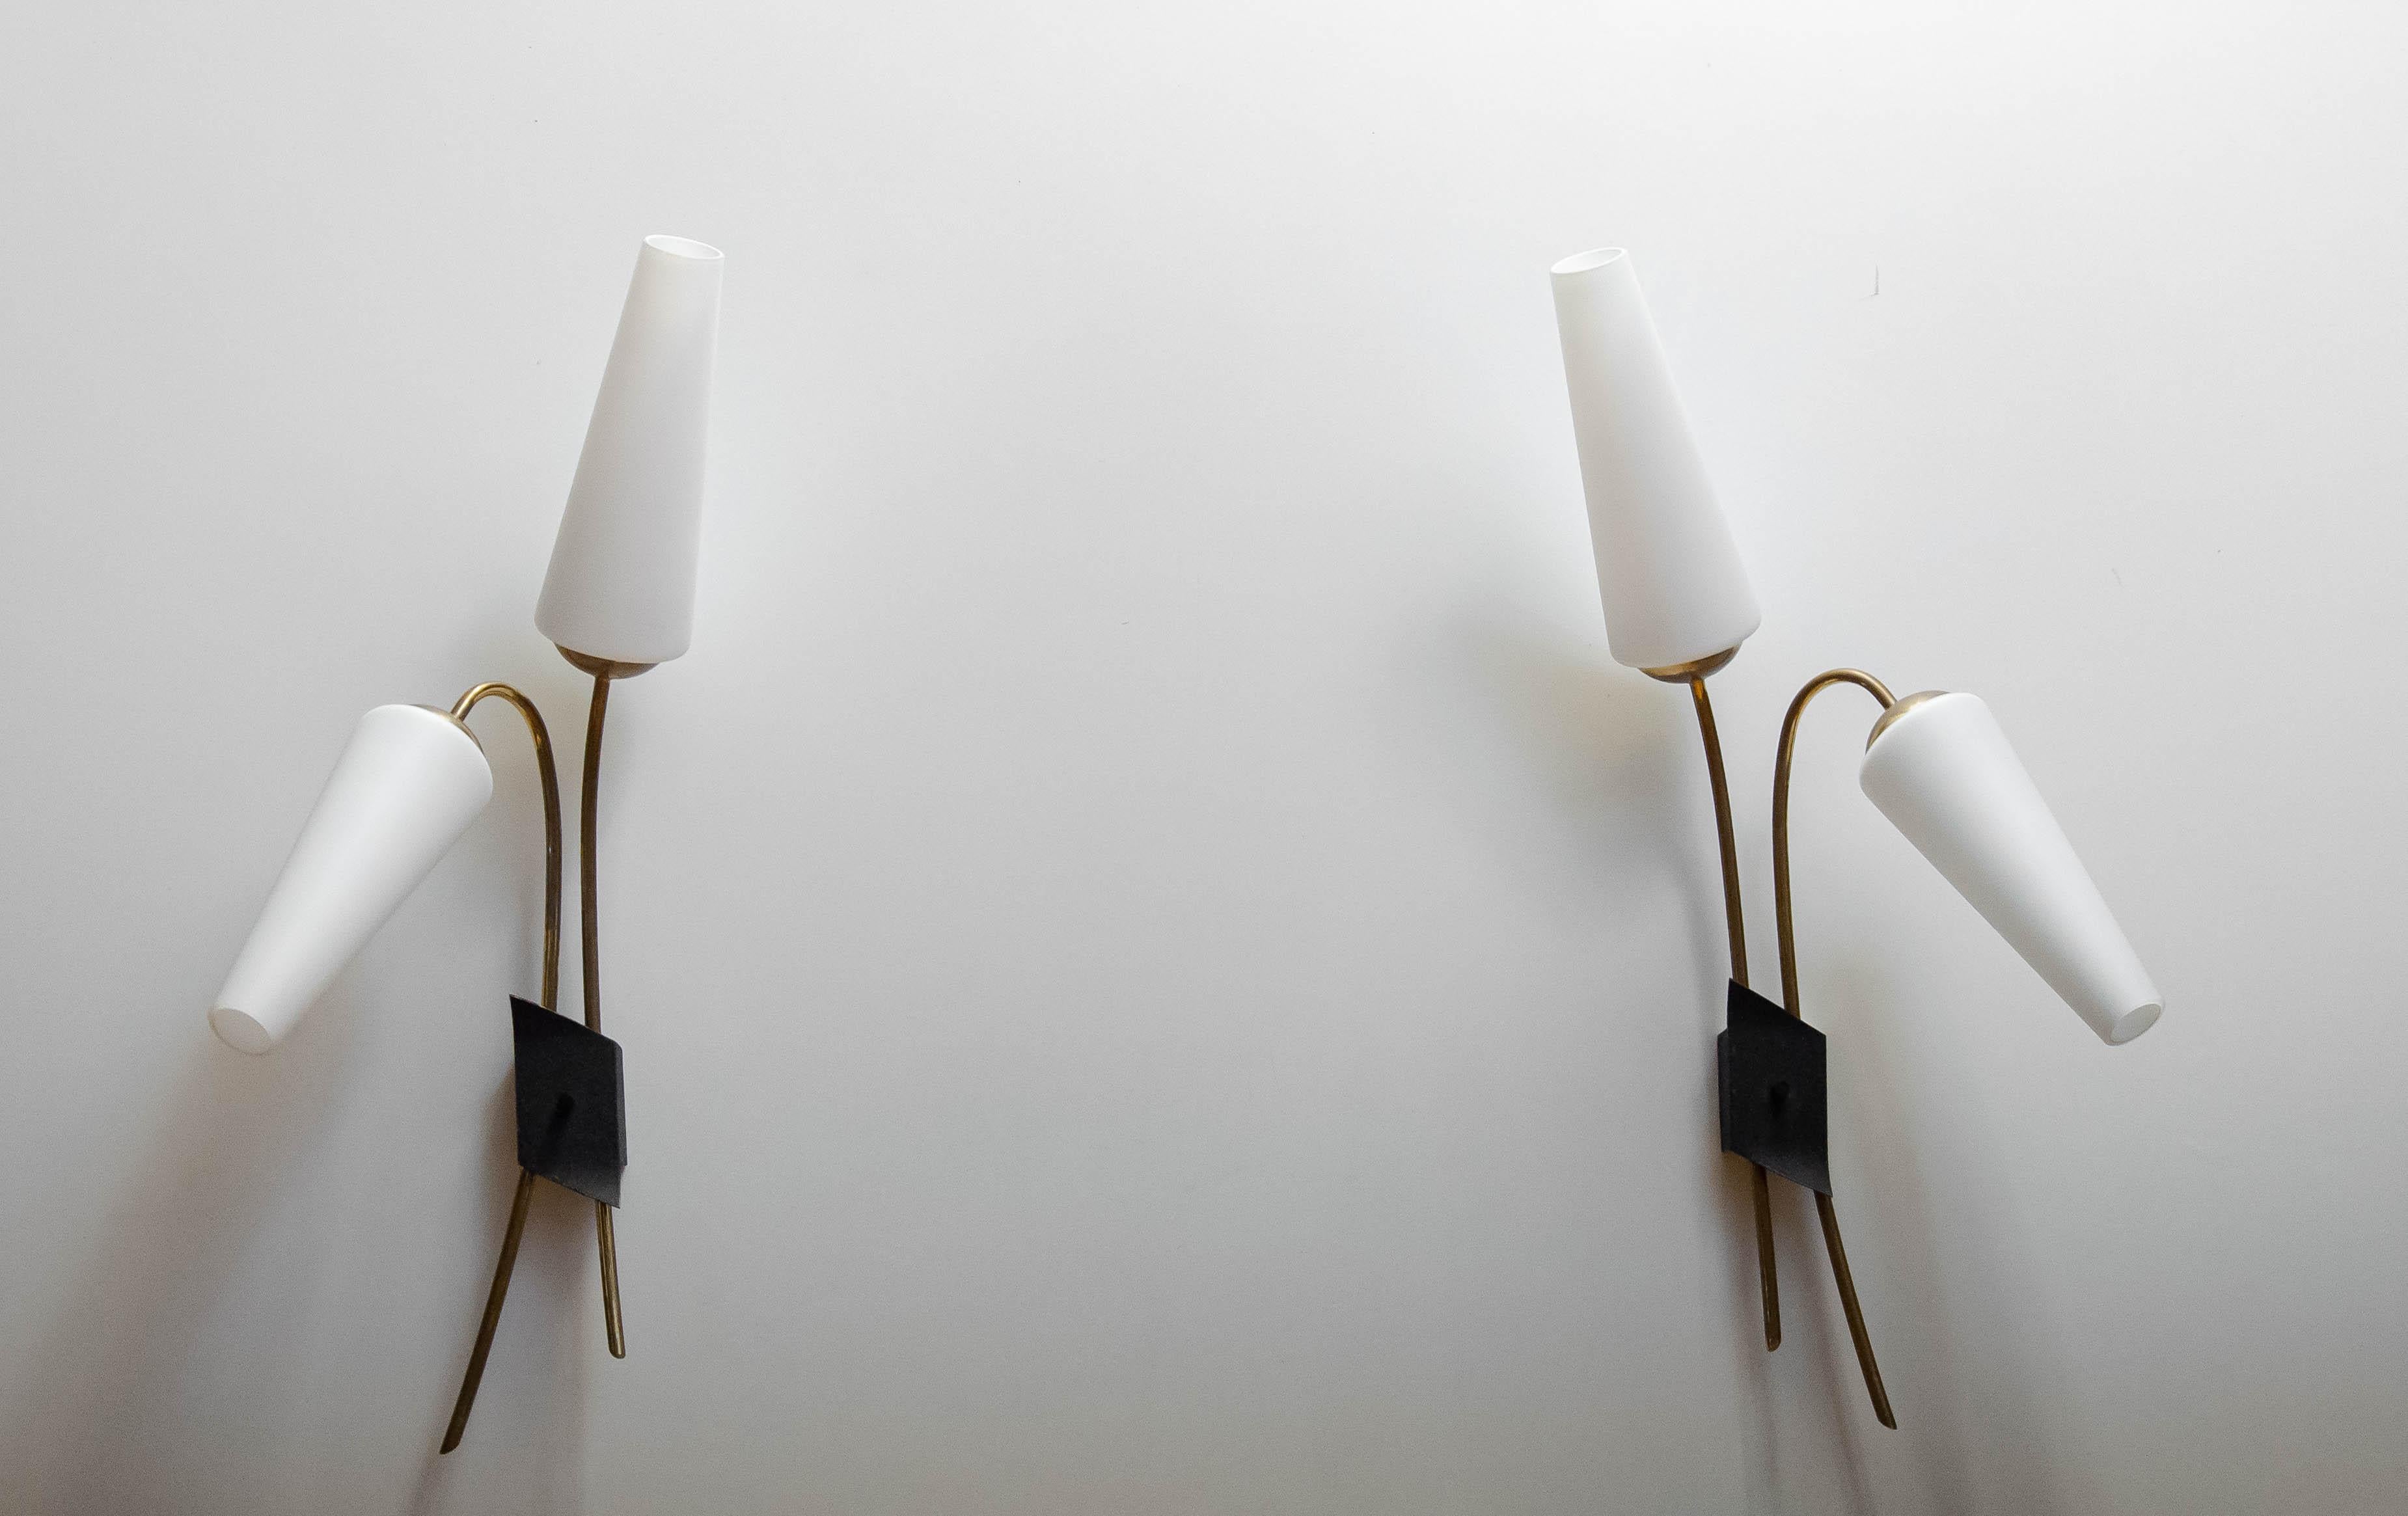 Pair French Brass And Opal Wall Lights / Sconces By Maison Lunel From The 1950s For Sale 2